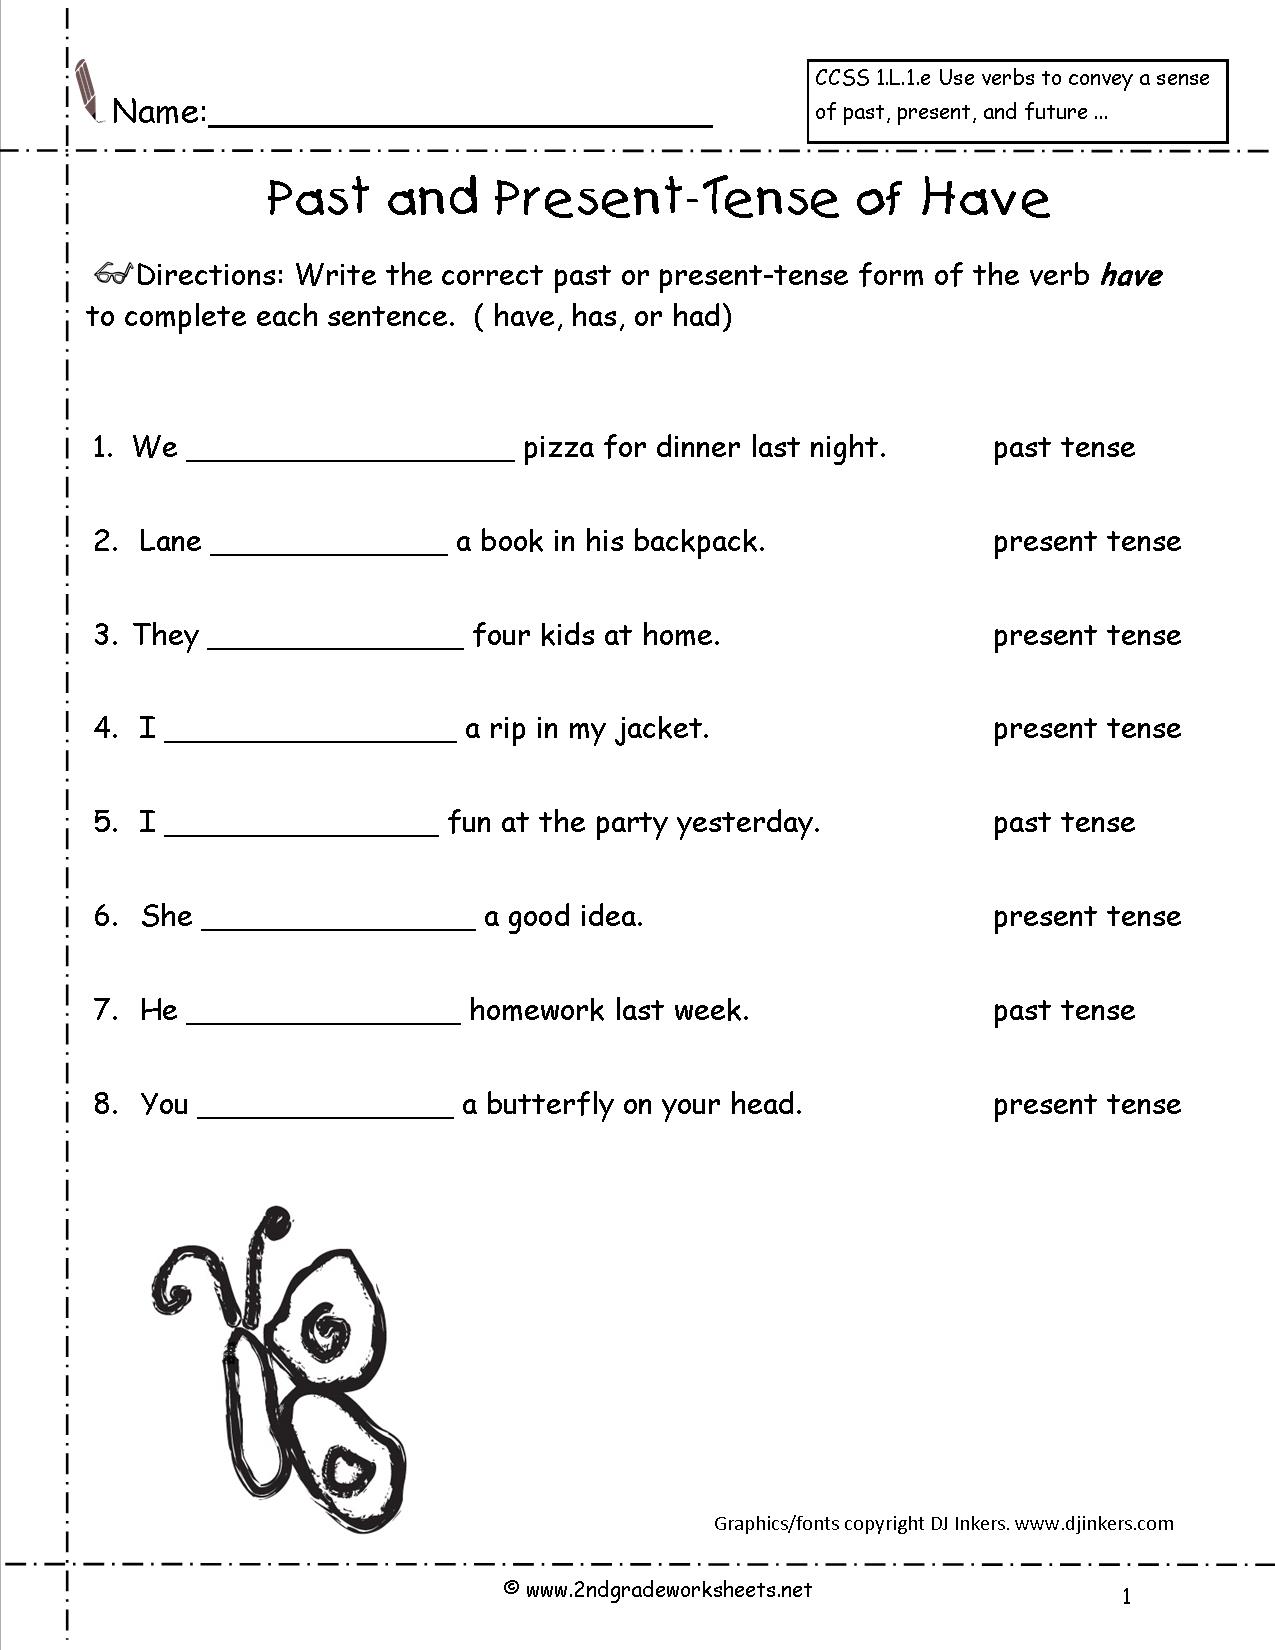 worksheets-for-past-tense-verbs